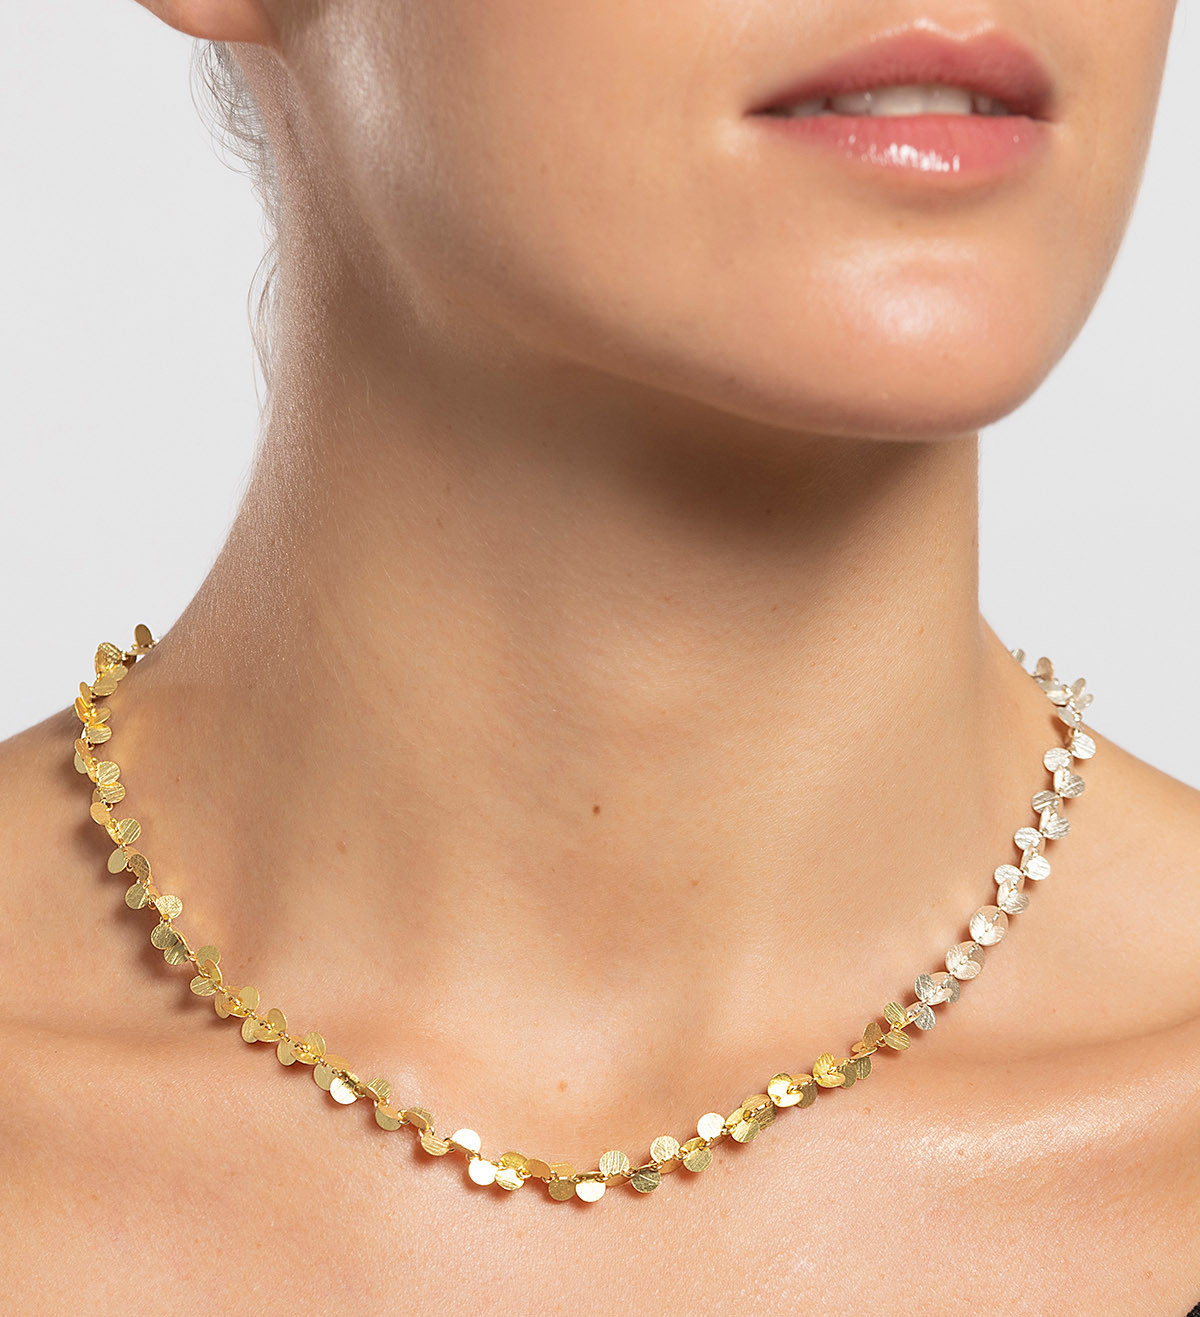 18k gold and silver necklace Papallones 45cm